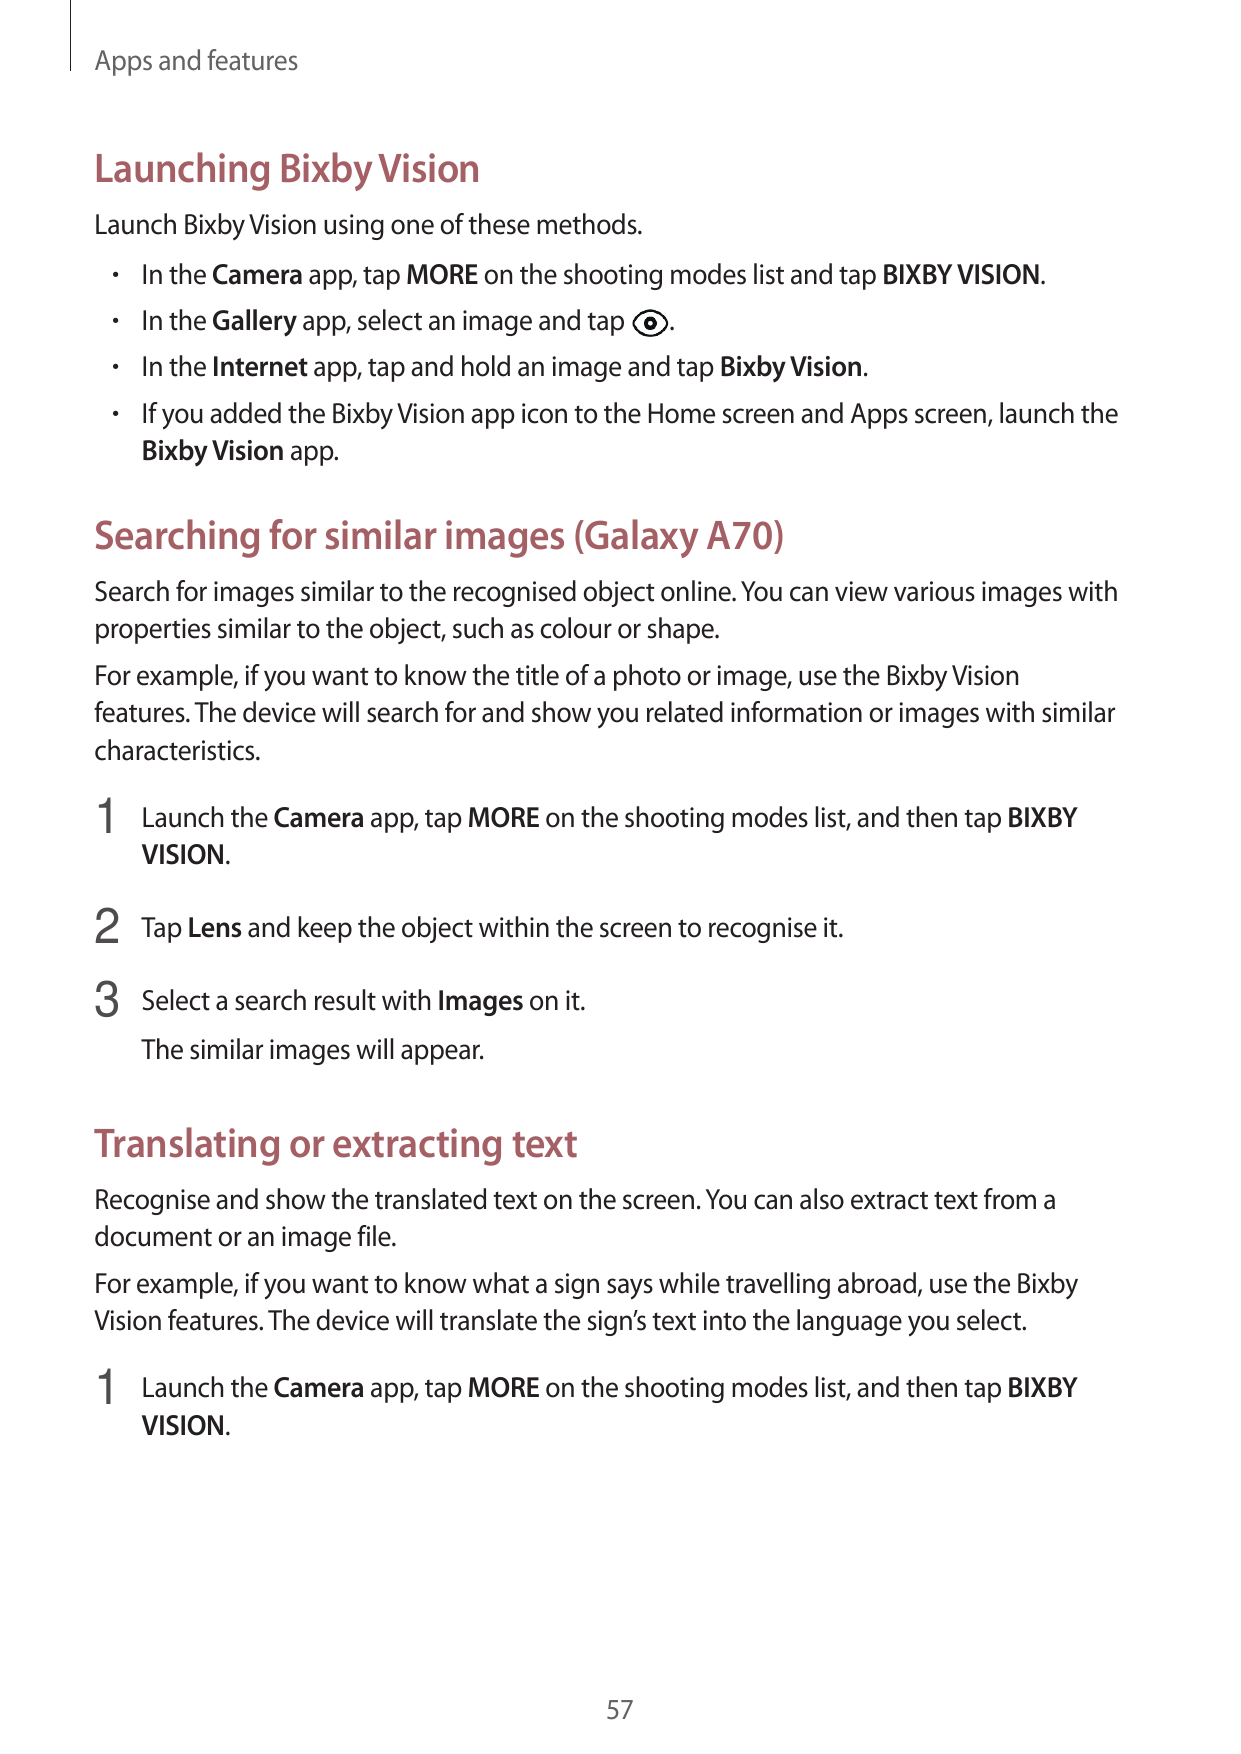 Apps and featuresLaunching Bixby VisionLaunch Bixby Vision using one of these methods.• In the Camera app, tap MORE on the shoot